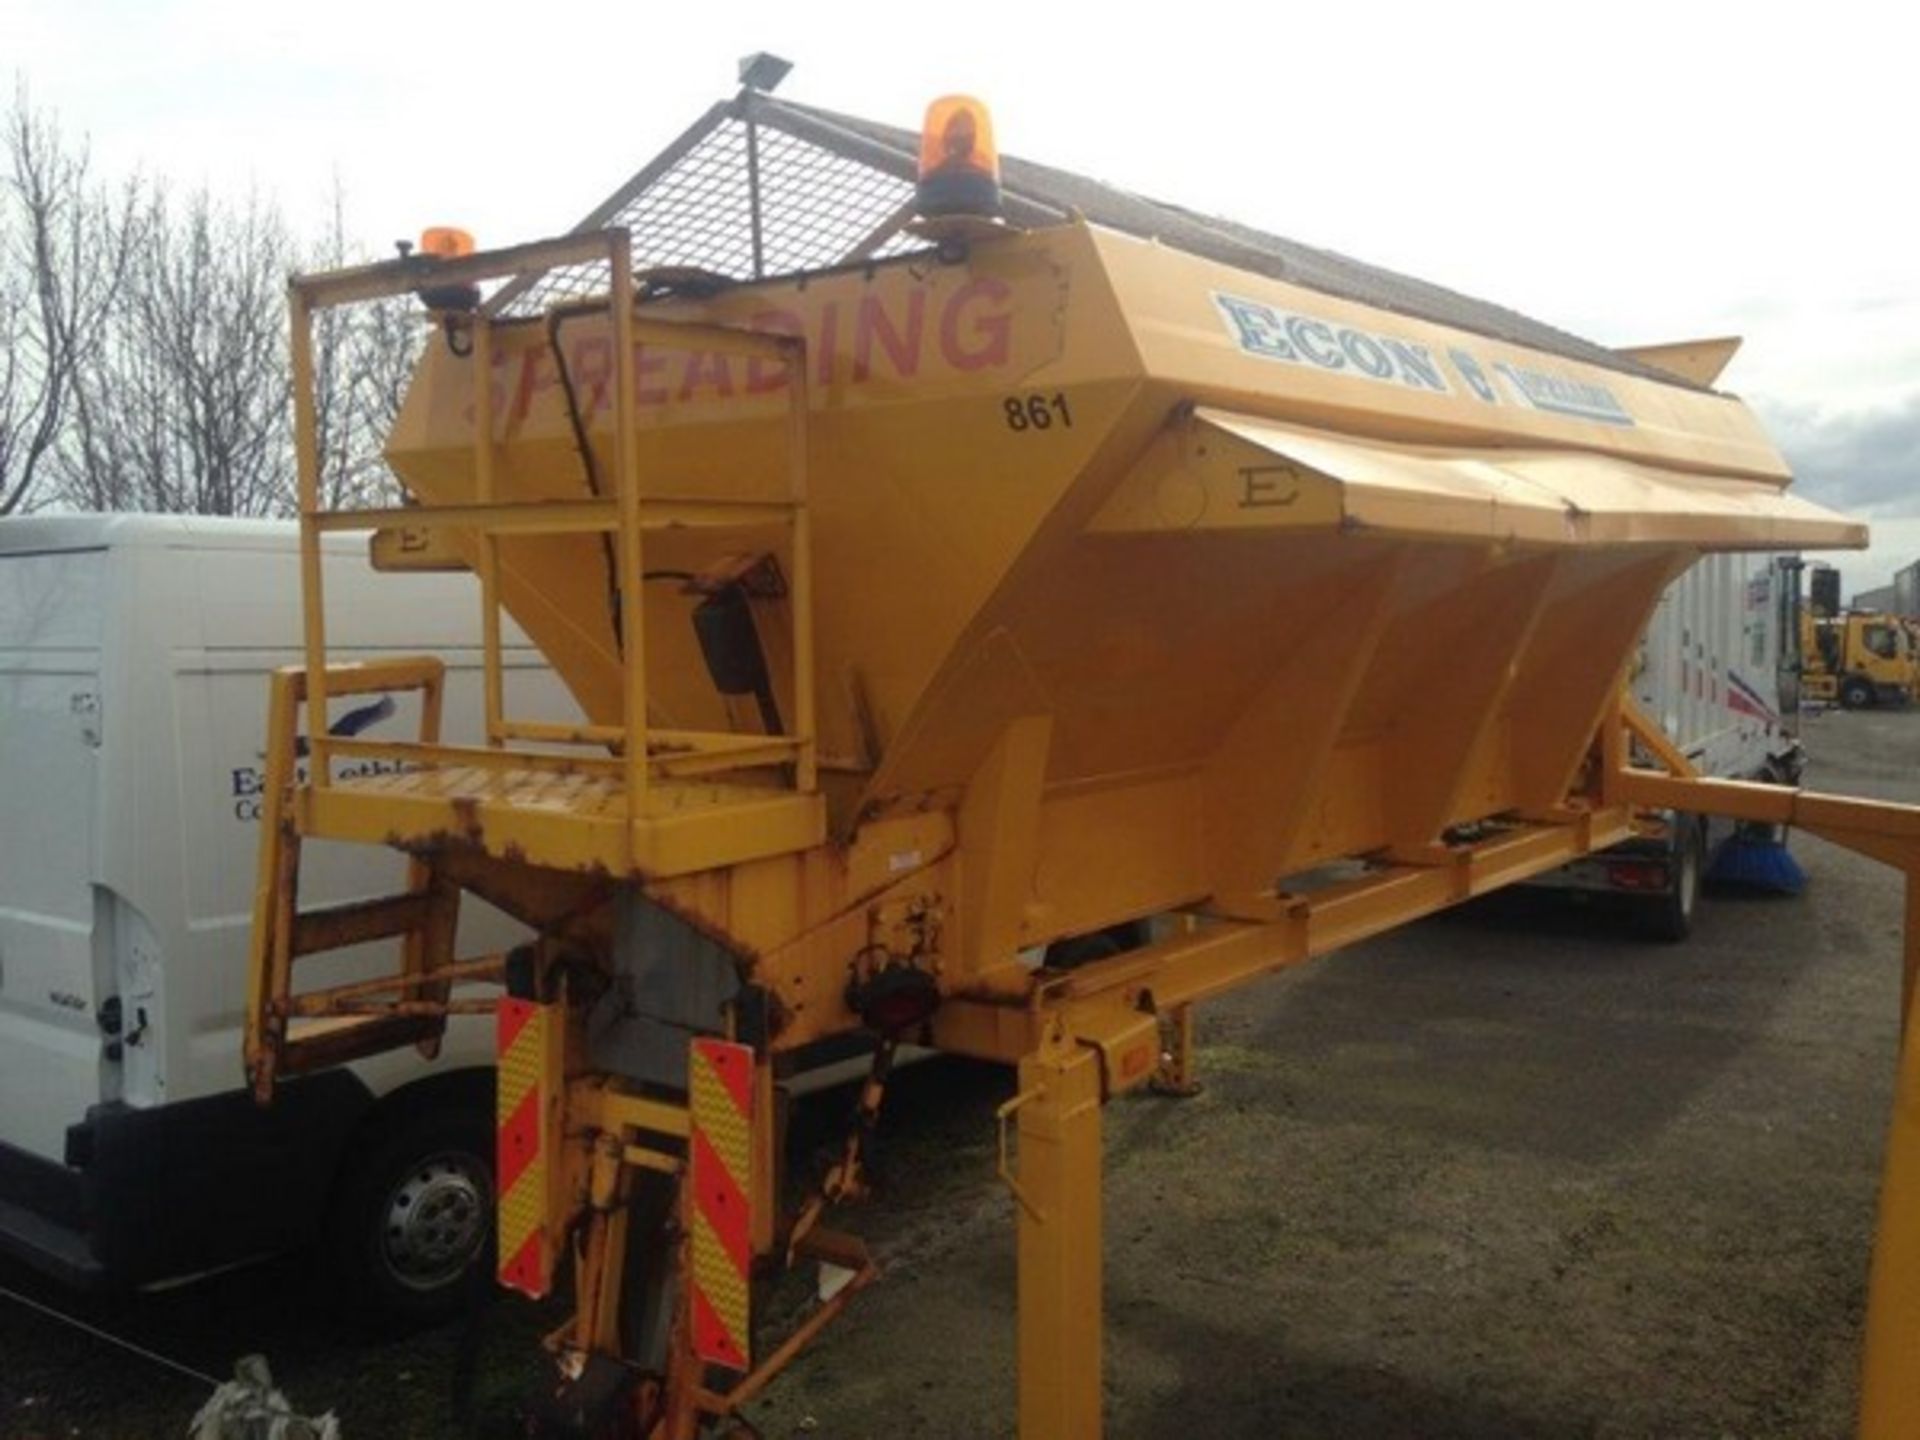 2004 ECON WZCQHJ46 body gritter s/n 37770 Reg No SN58 CVH (861) **To be sold from Errol auction s - Image 8 of 12